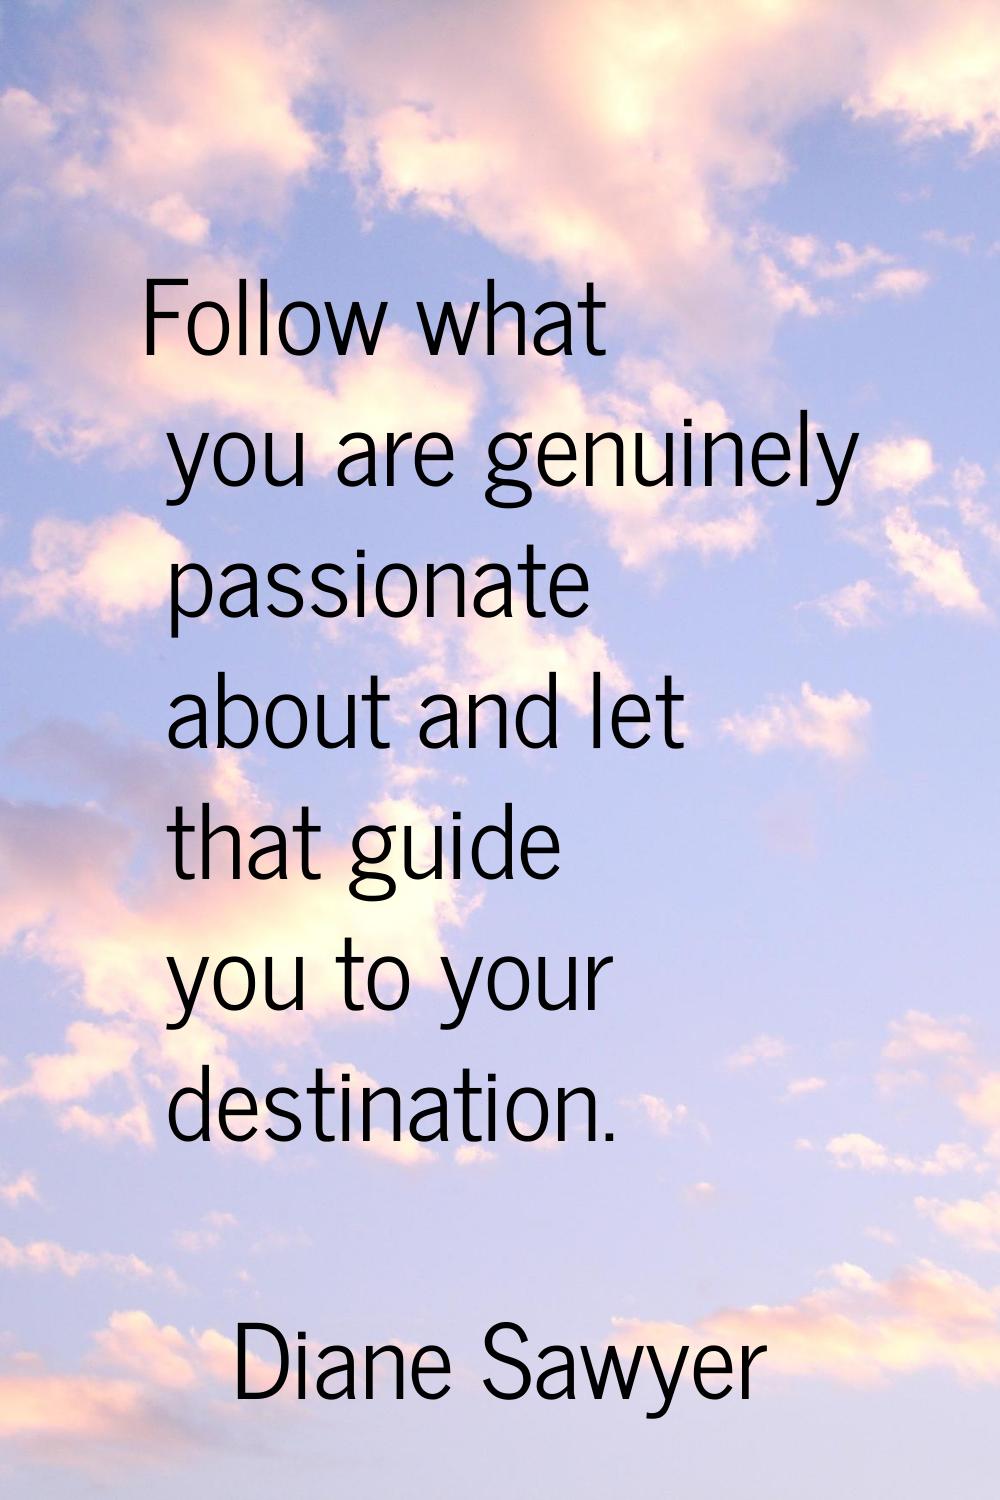 Follow what you are genuinely passionate about and let that guide you to your destination.